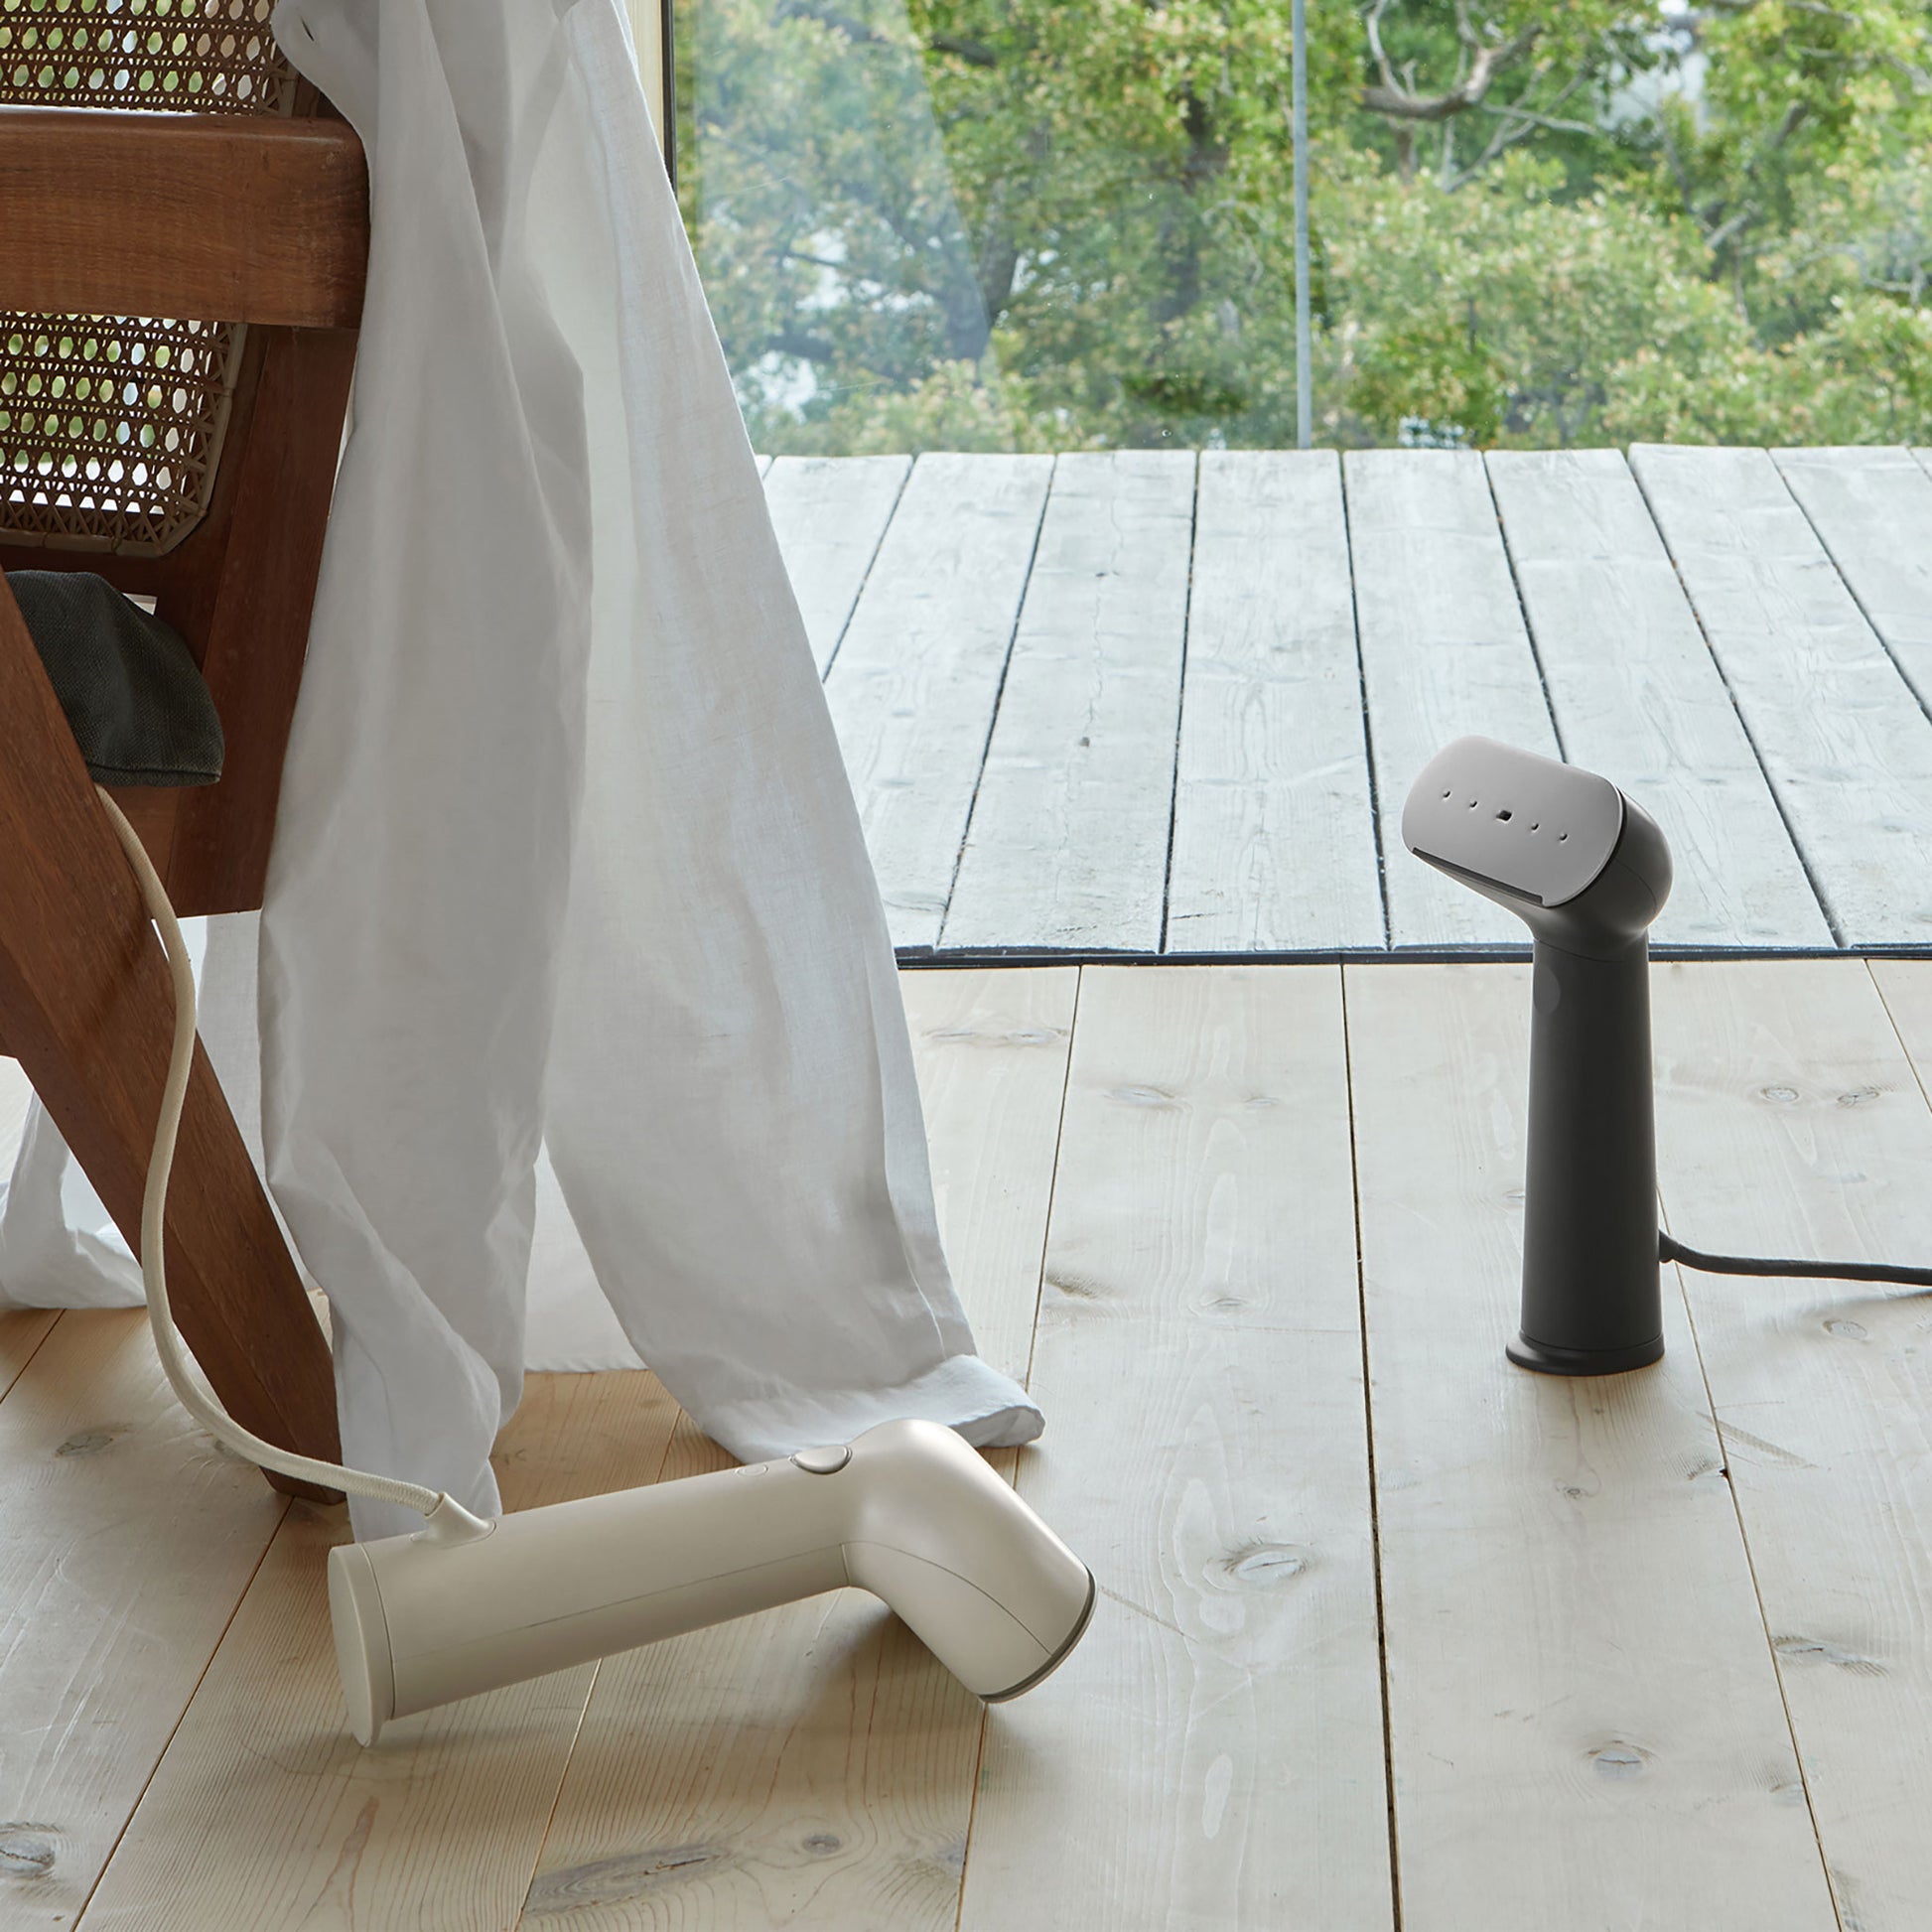 Two sleek devices can be seen on the wooden floor of a cottage – the black one is standing up and the light beige one is lying face down. These are dual function devices, used as both steamers and irons.